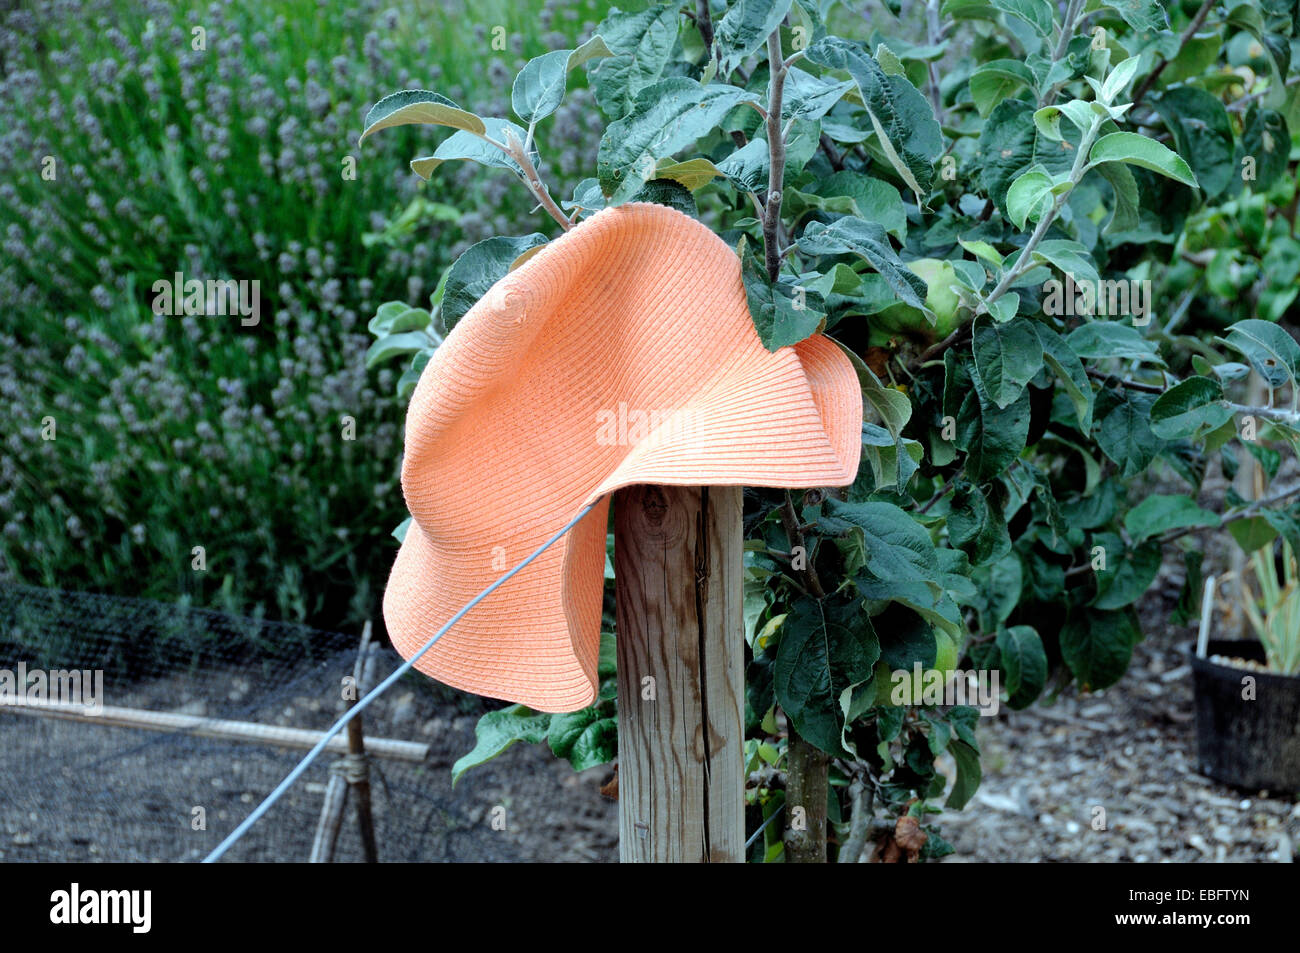 Brightly coloured sun hat on post in garden, Chiswick House Kitchen Garden, London Borough of Houndslow. Stock Photo